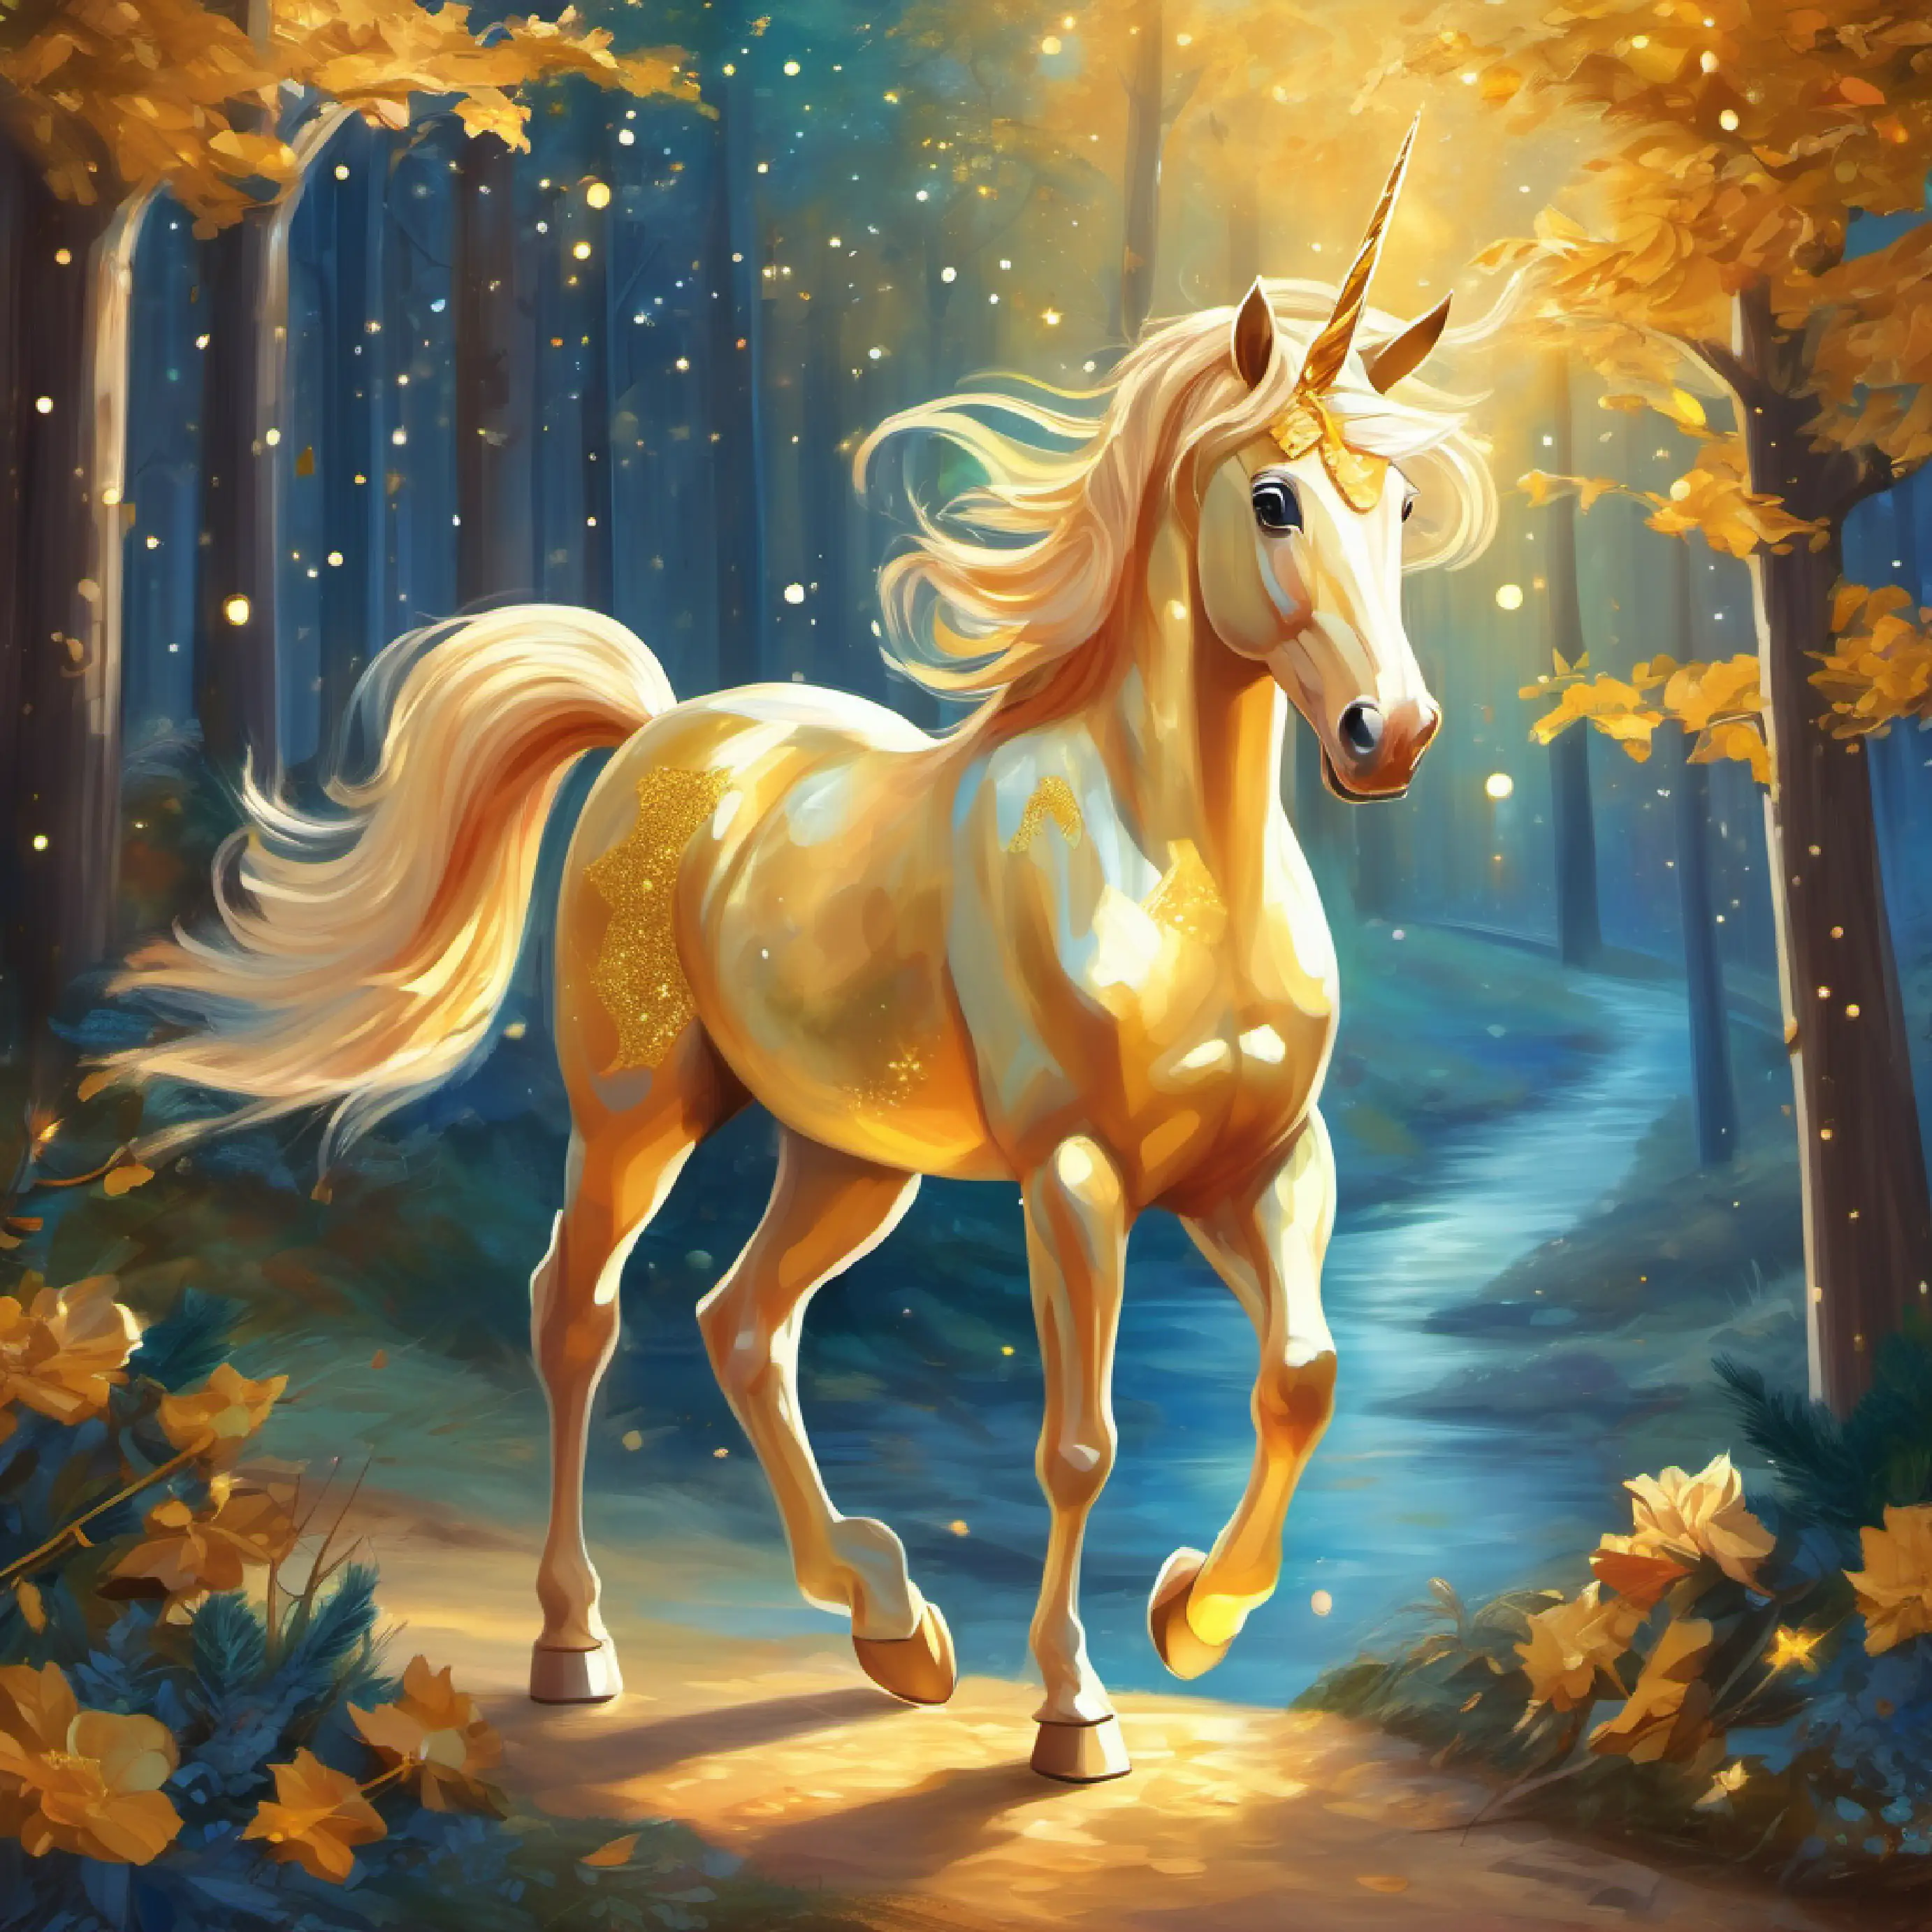 Young unicorn, golden hoof, stardust trail, eyes reflecting bravery spreads her gift and positivity, making friends on her journey.